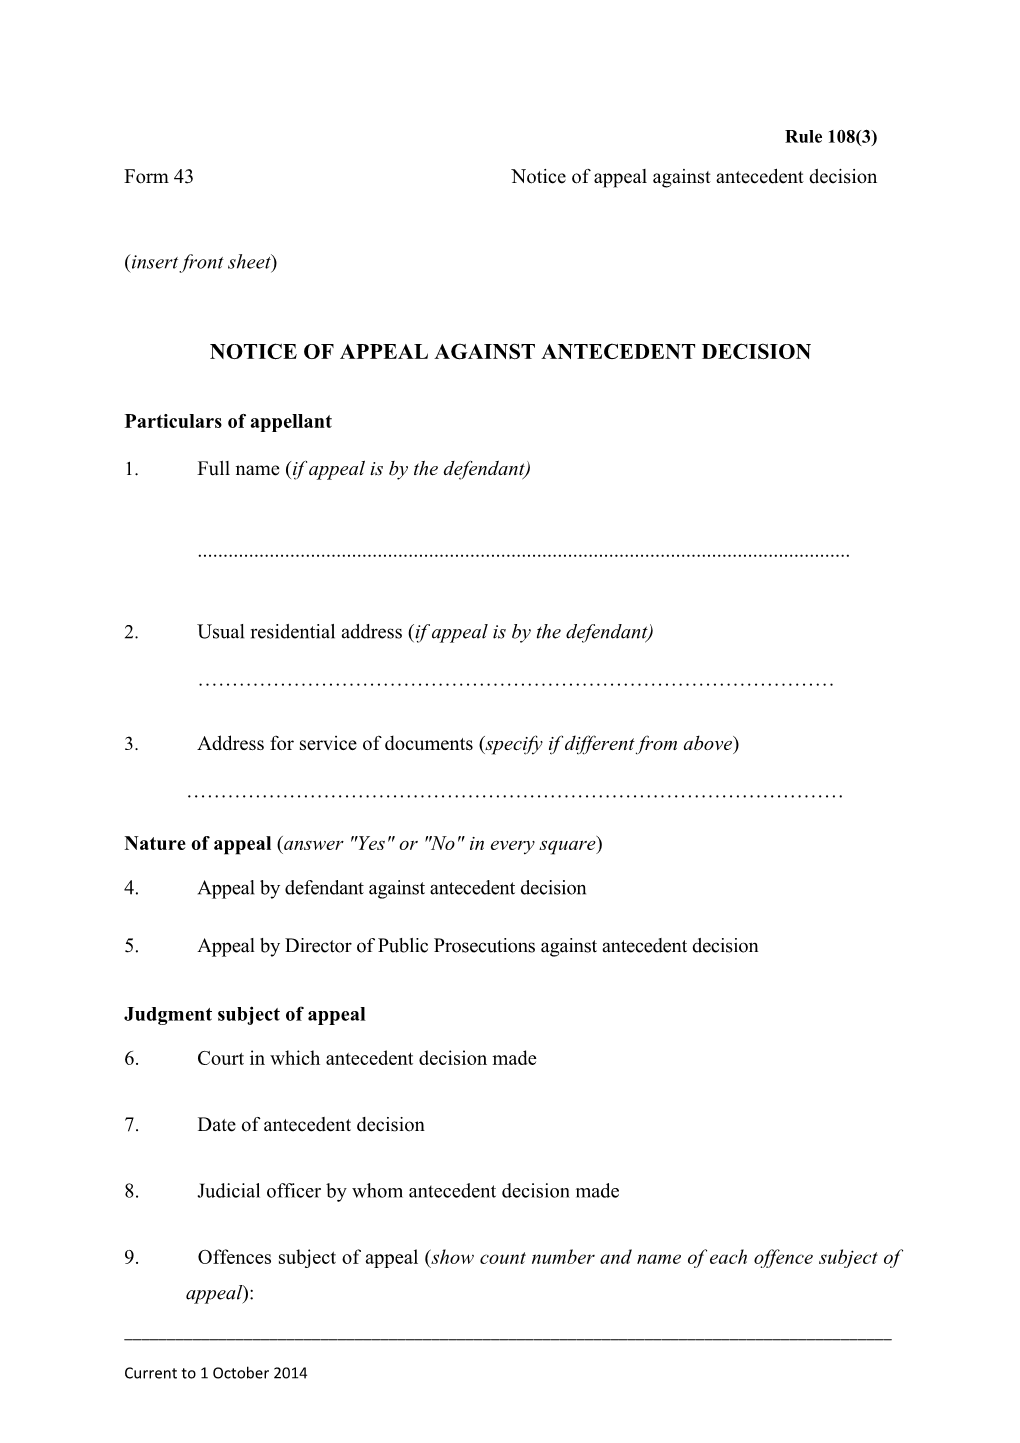 Form 43 - Notice of Appeal Against Antecedent Decision